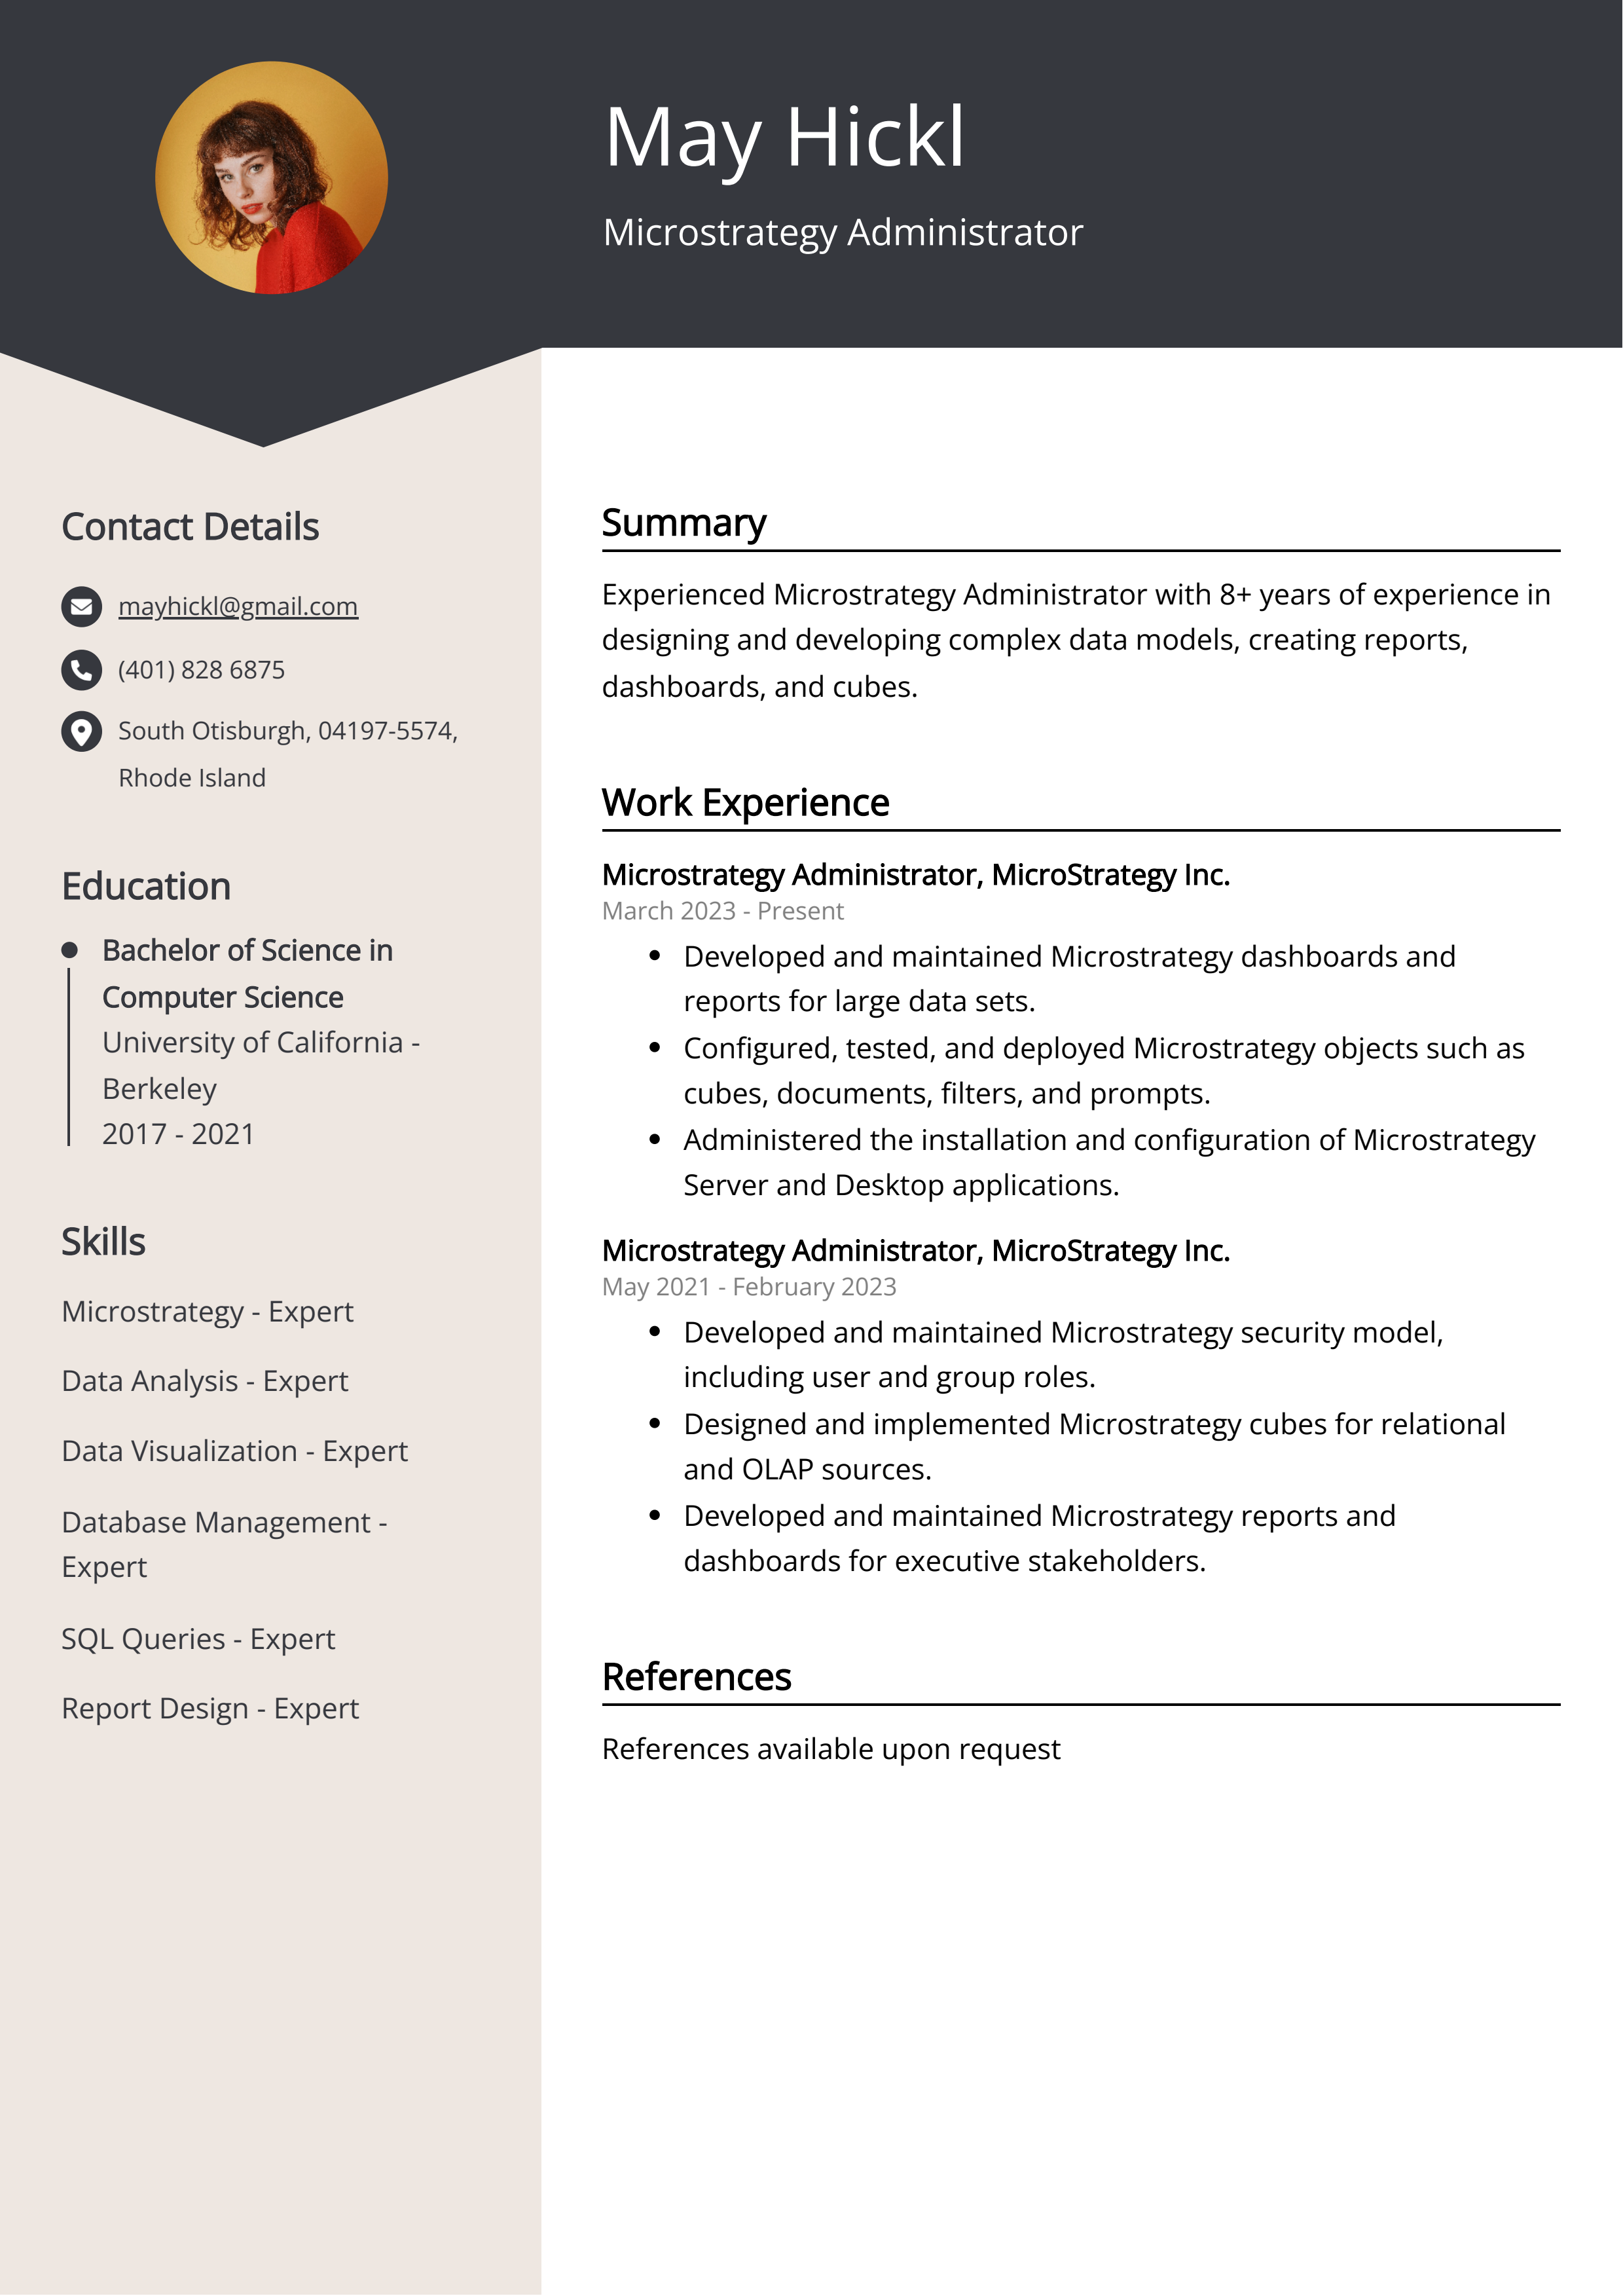 Microstrategy Administrator CV Example